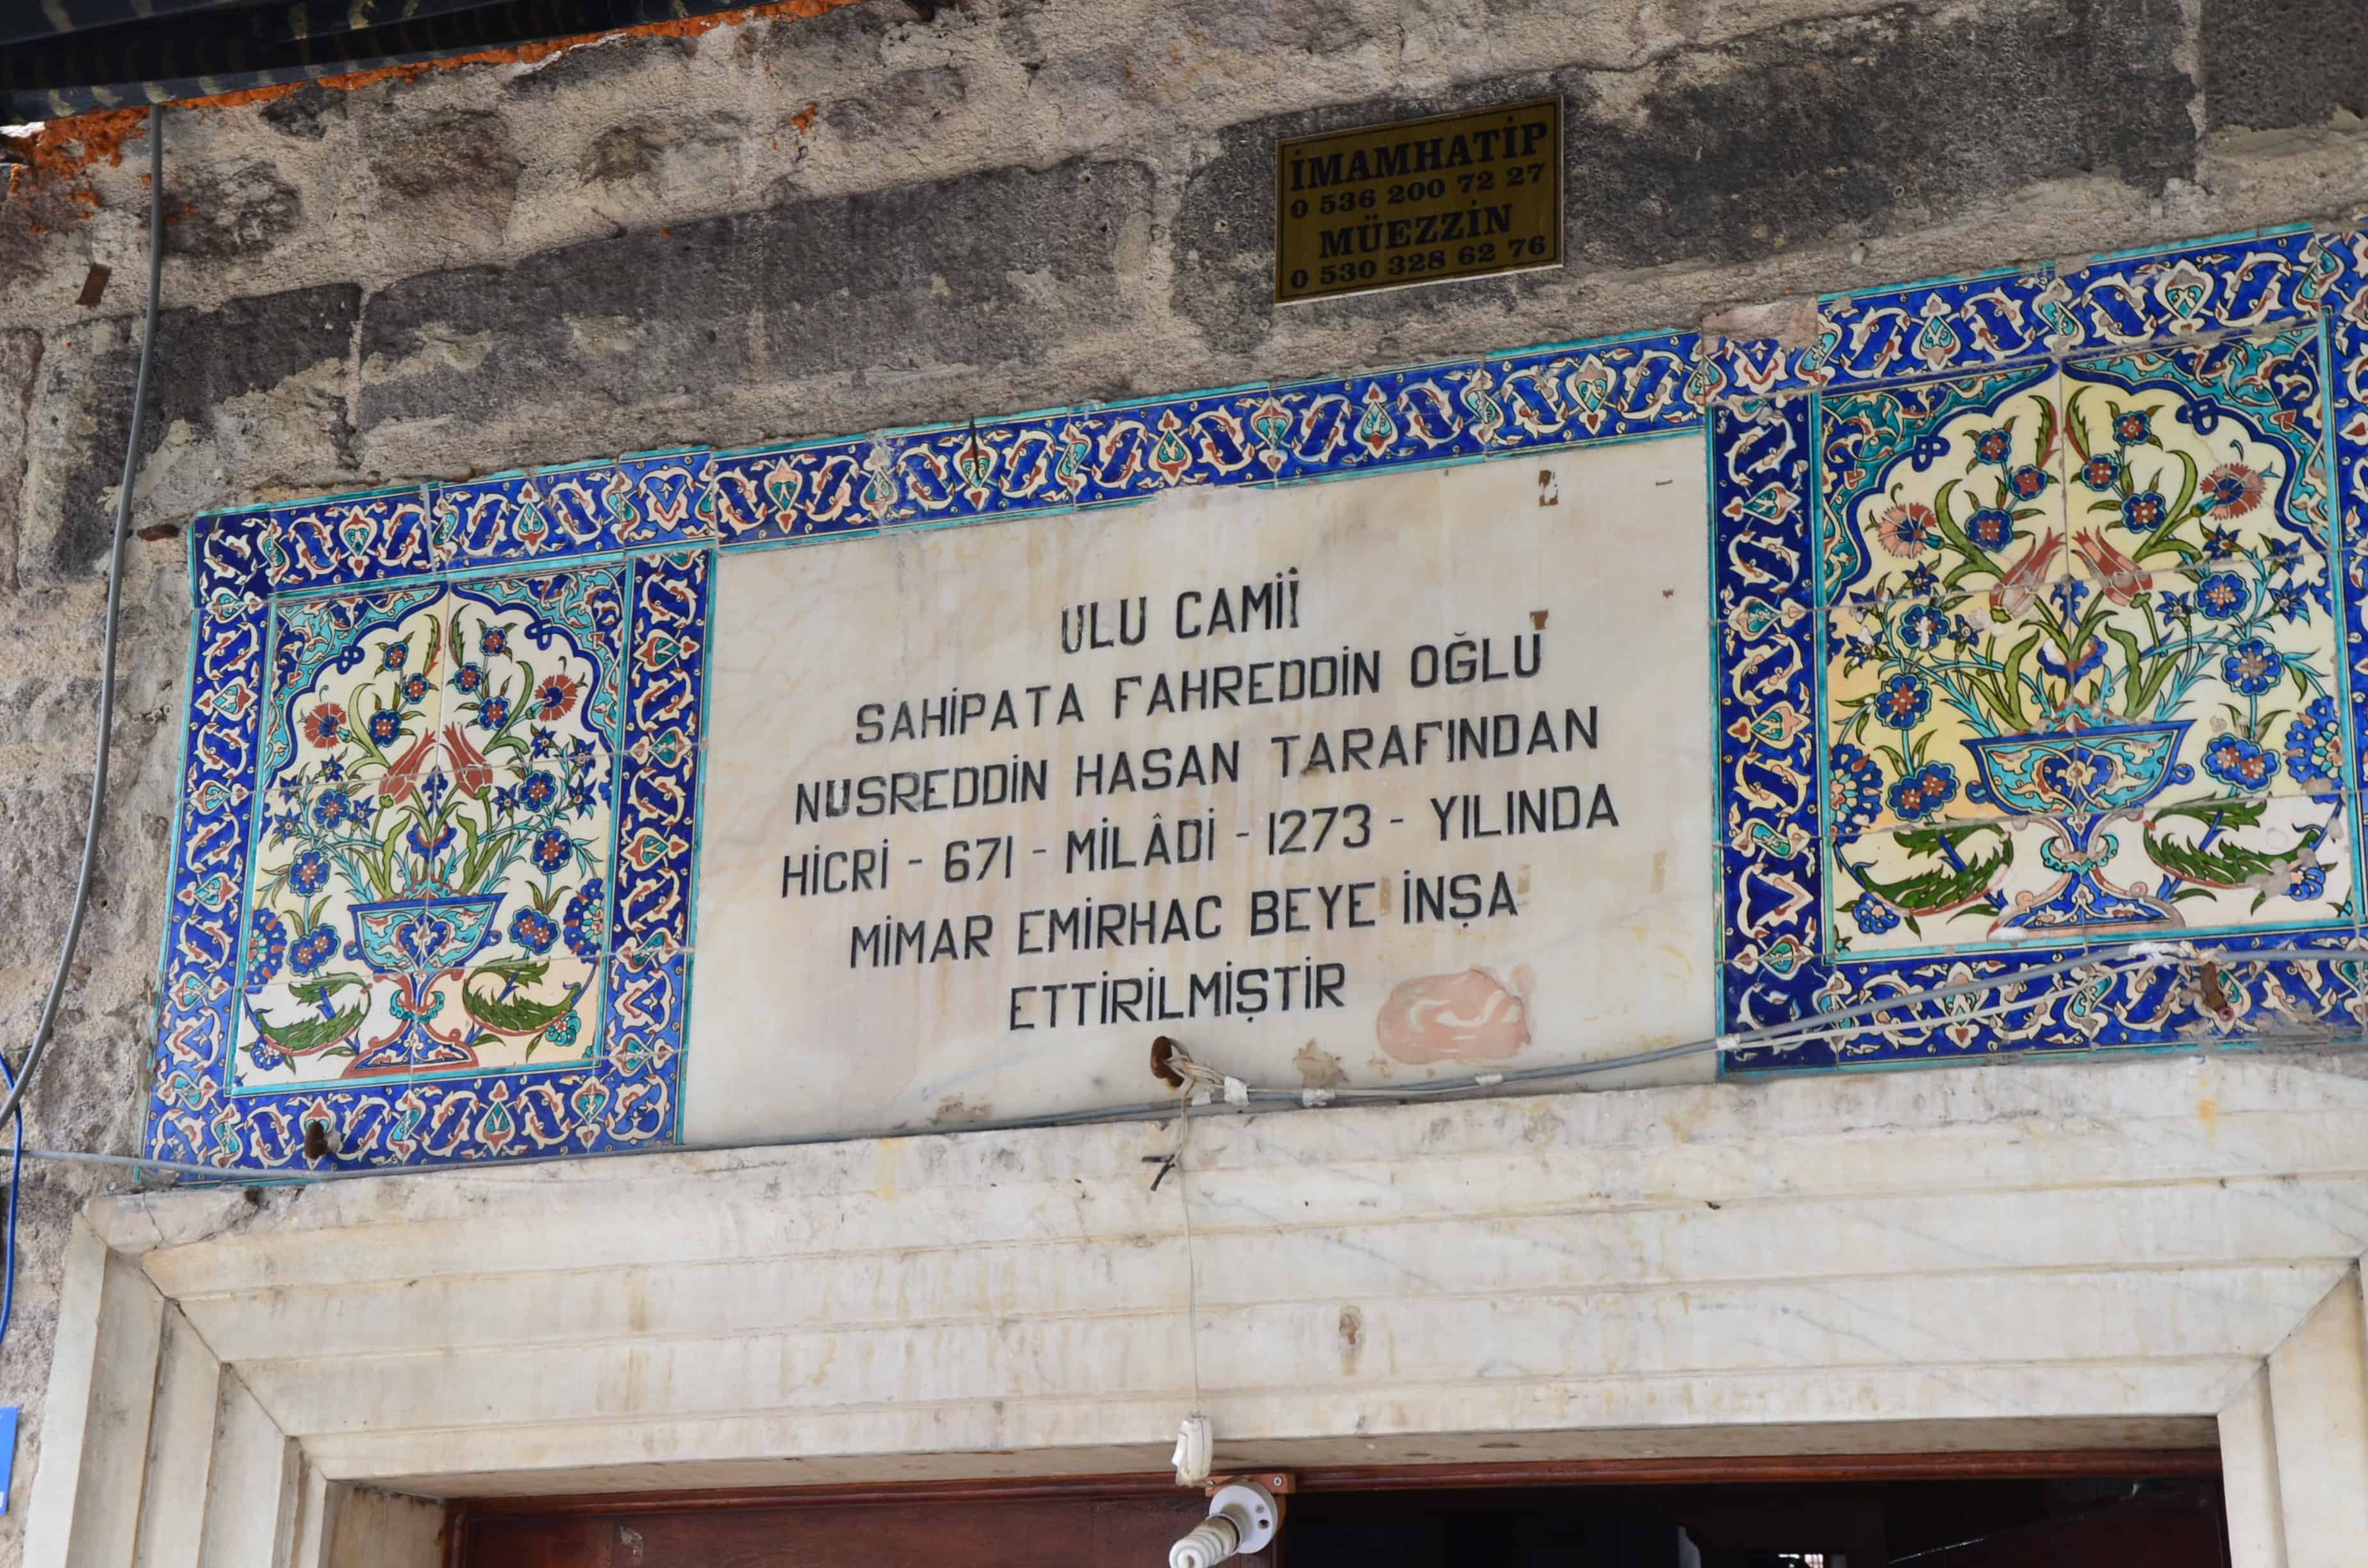 Inscription above the entrance to the Great Mosque